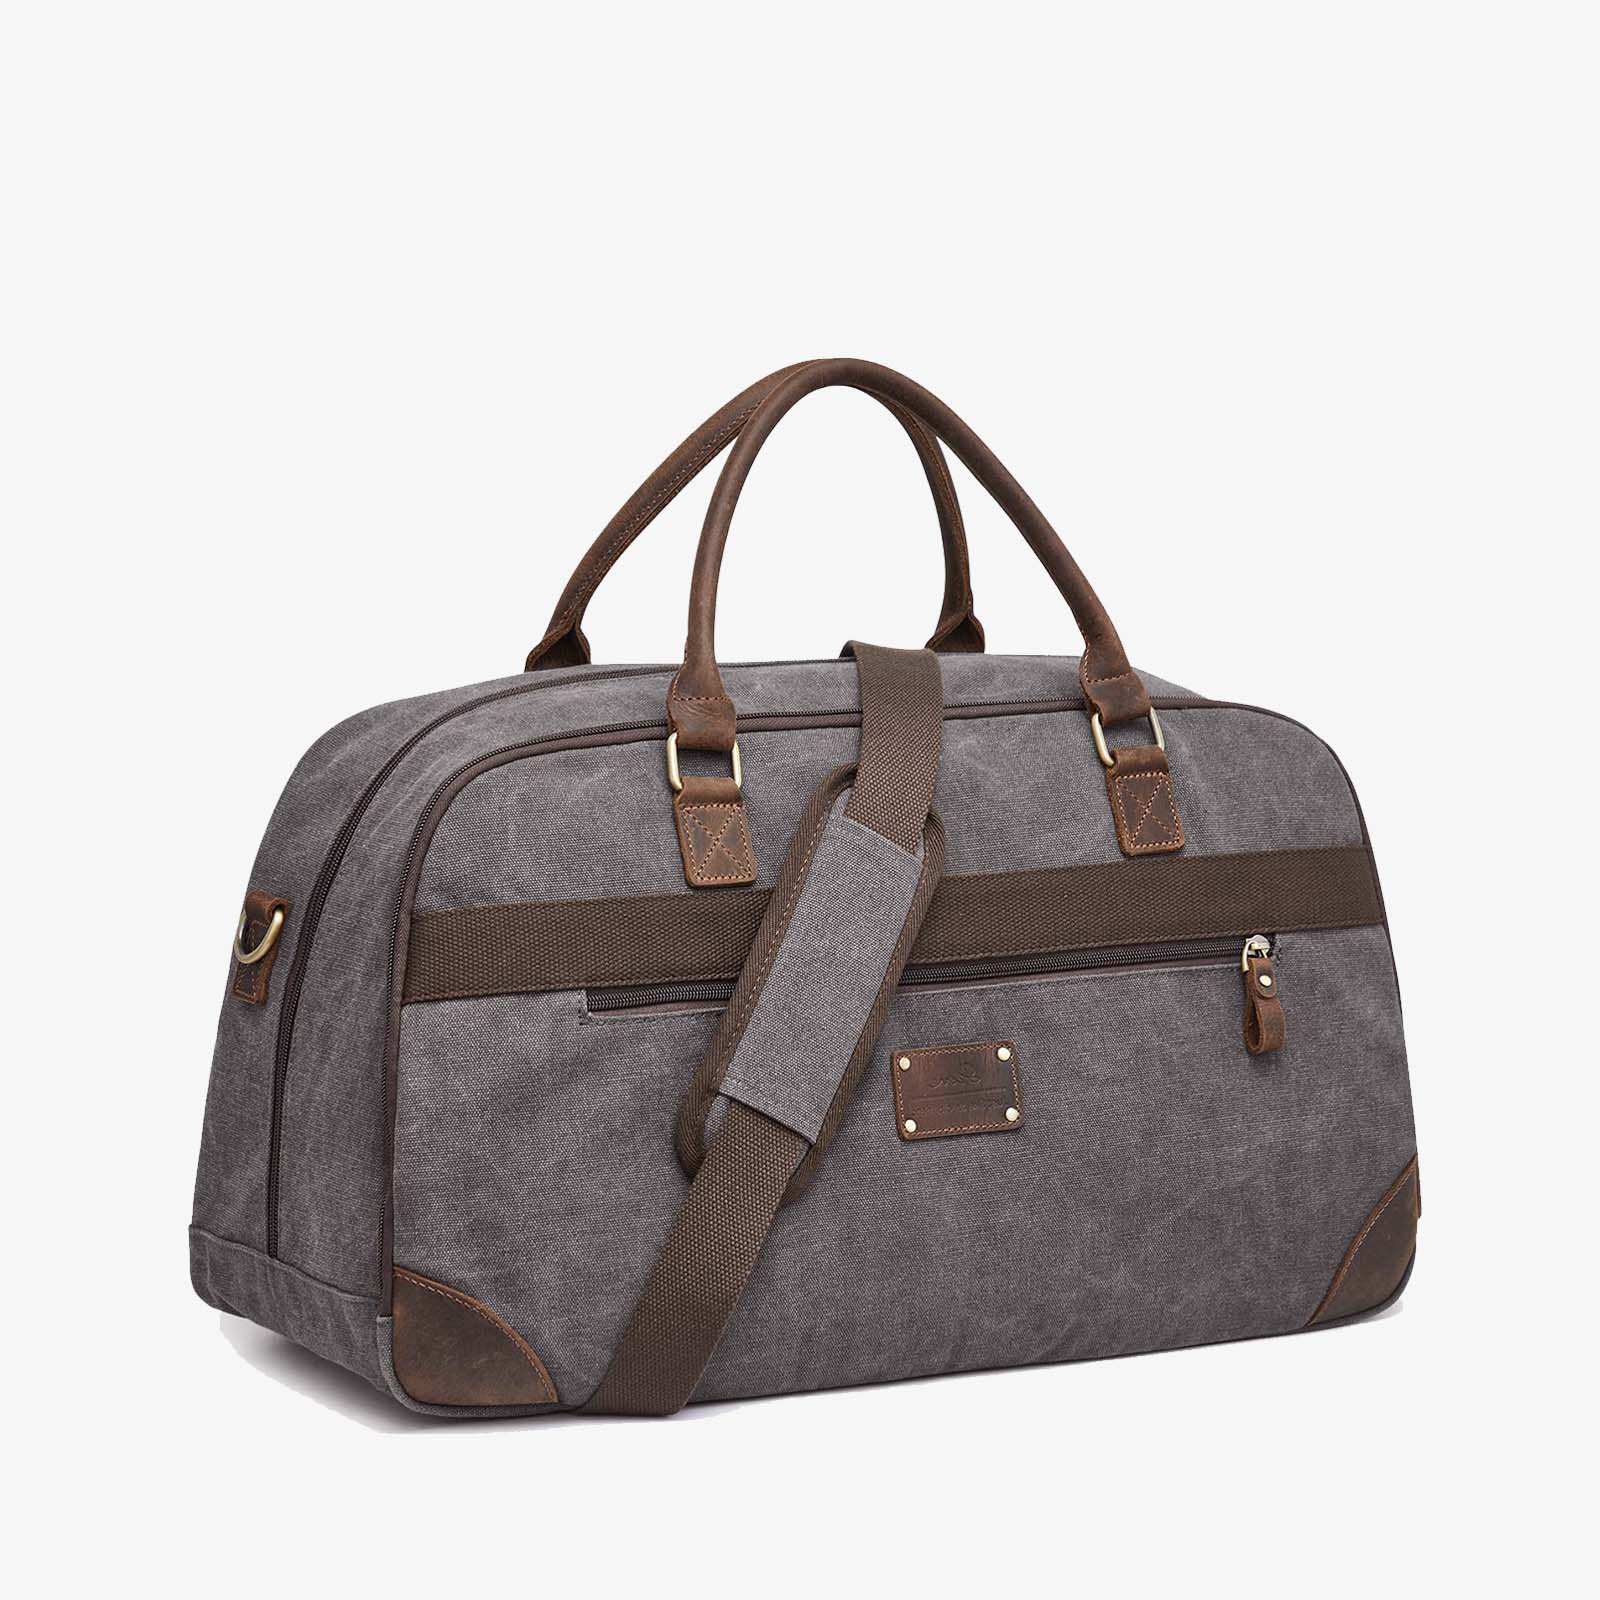 Small Travel Bags- Shop Latest Small Travell Bags Online